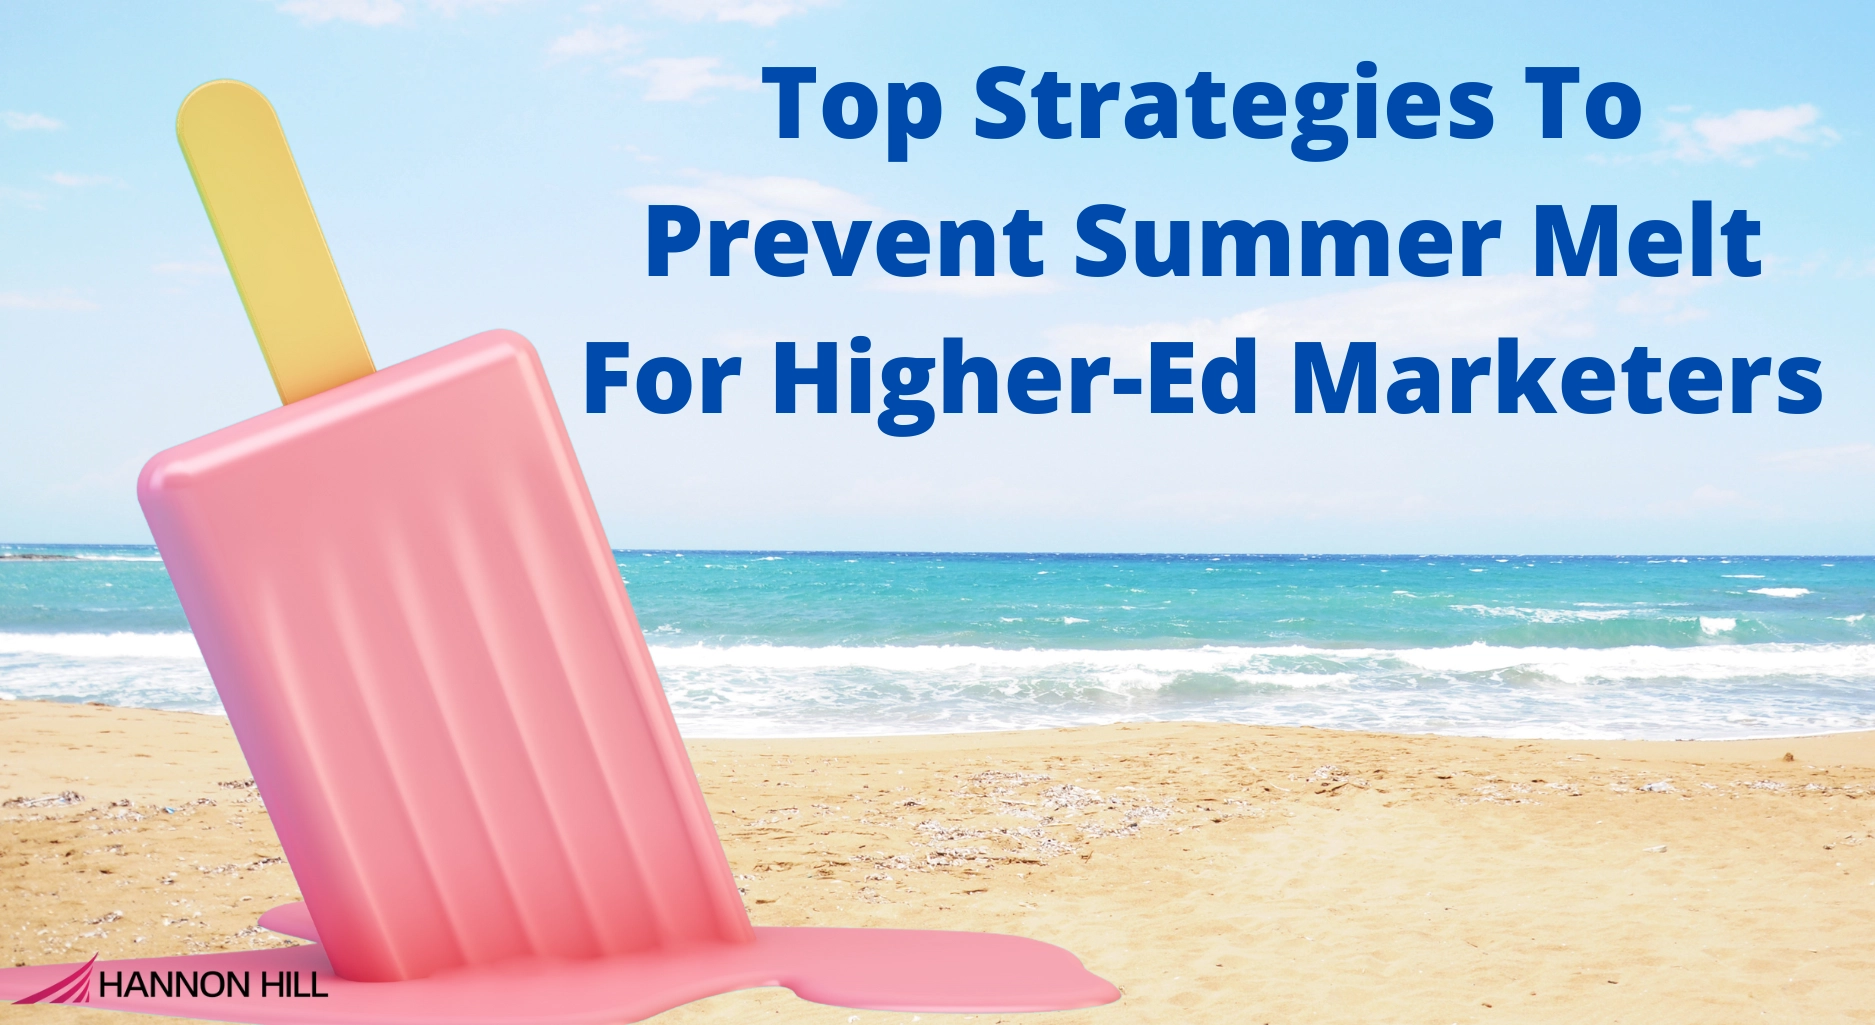 Top Strategies to Prevent Summer Melt for Higher Ed-Marketers